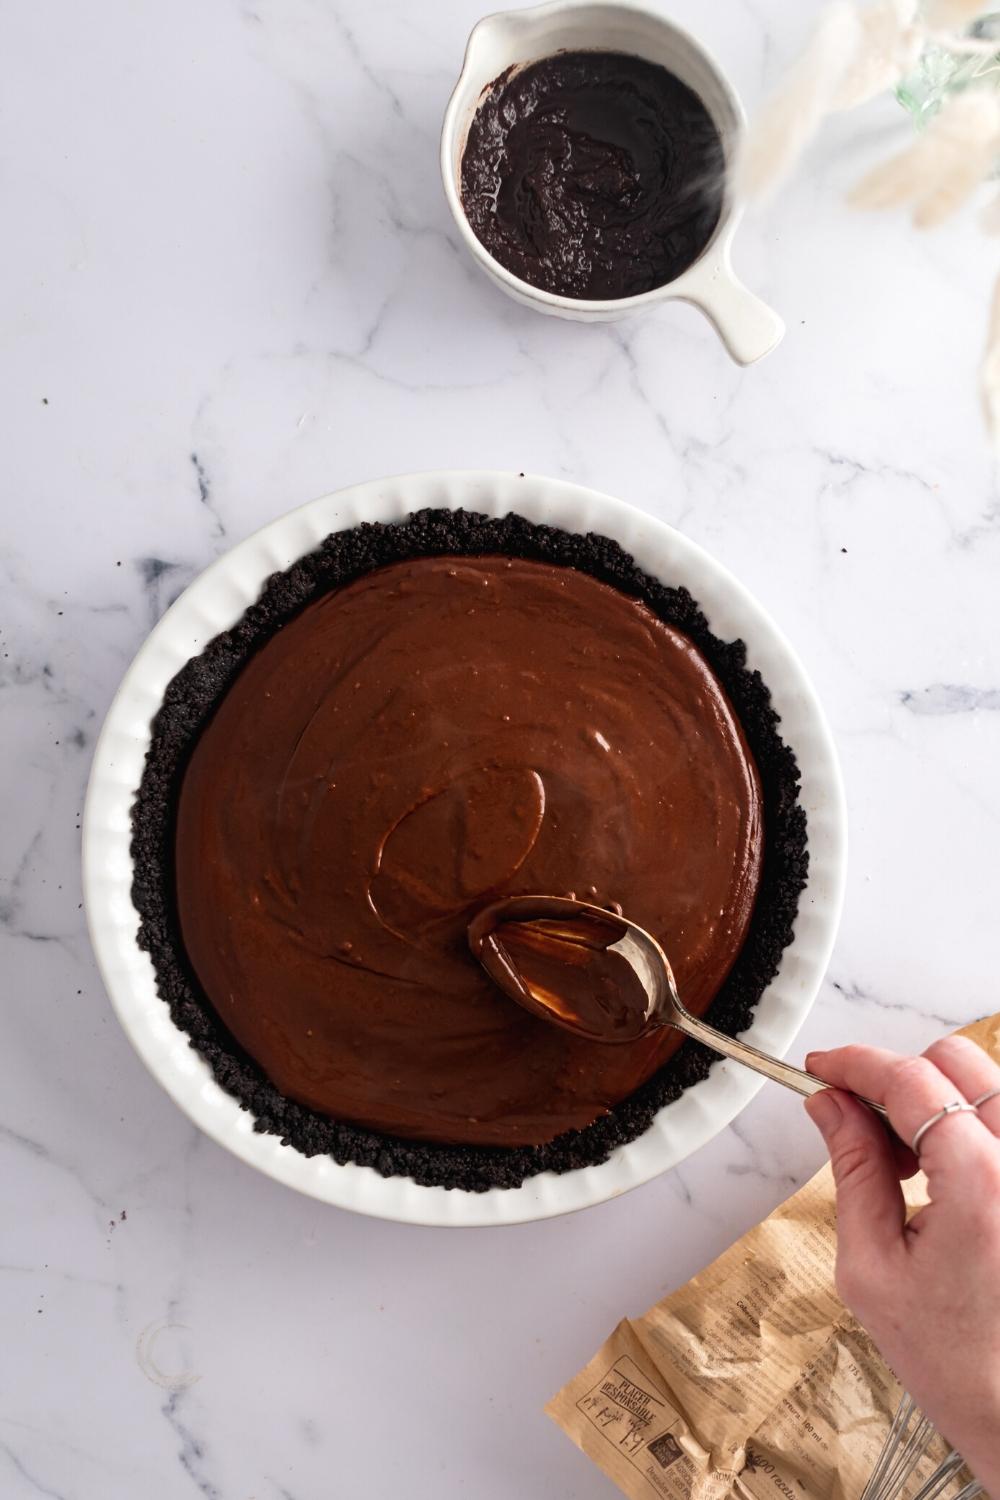 A hand spooning chocolate filling onto an Oreo pie crust.